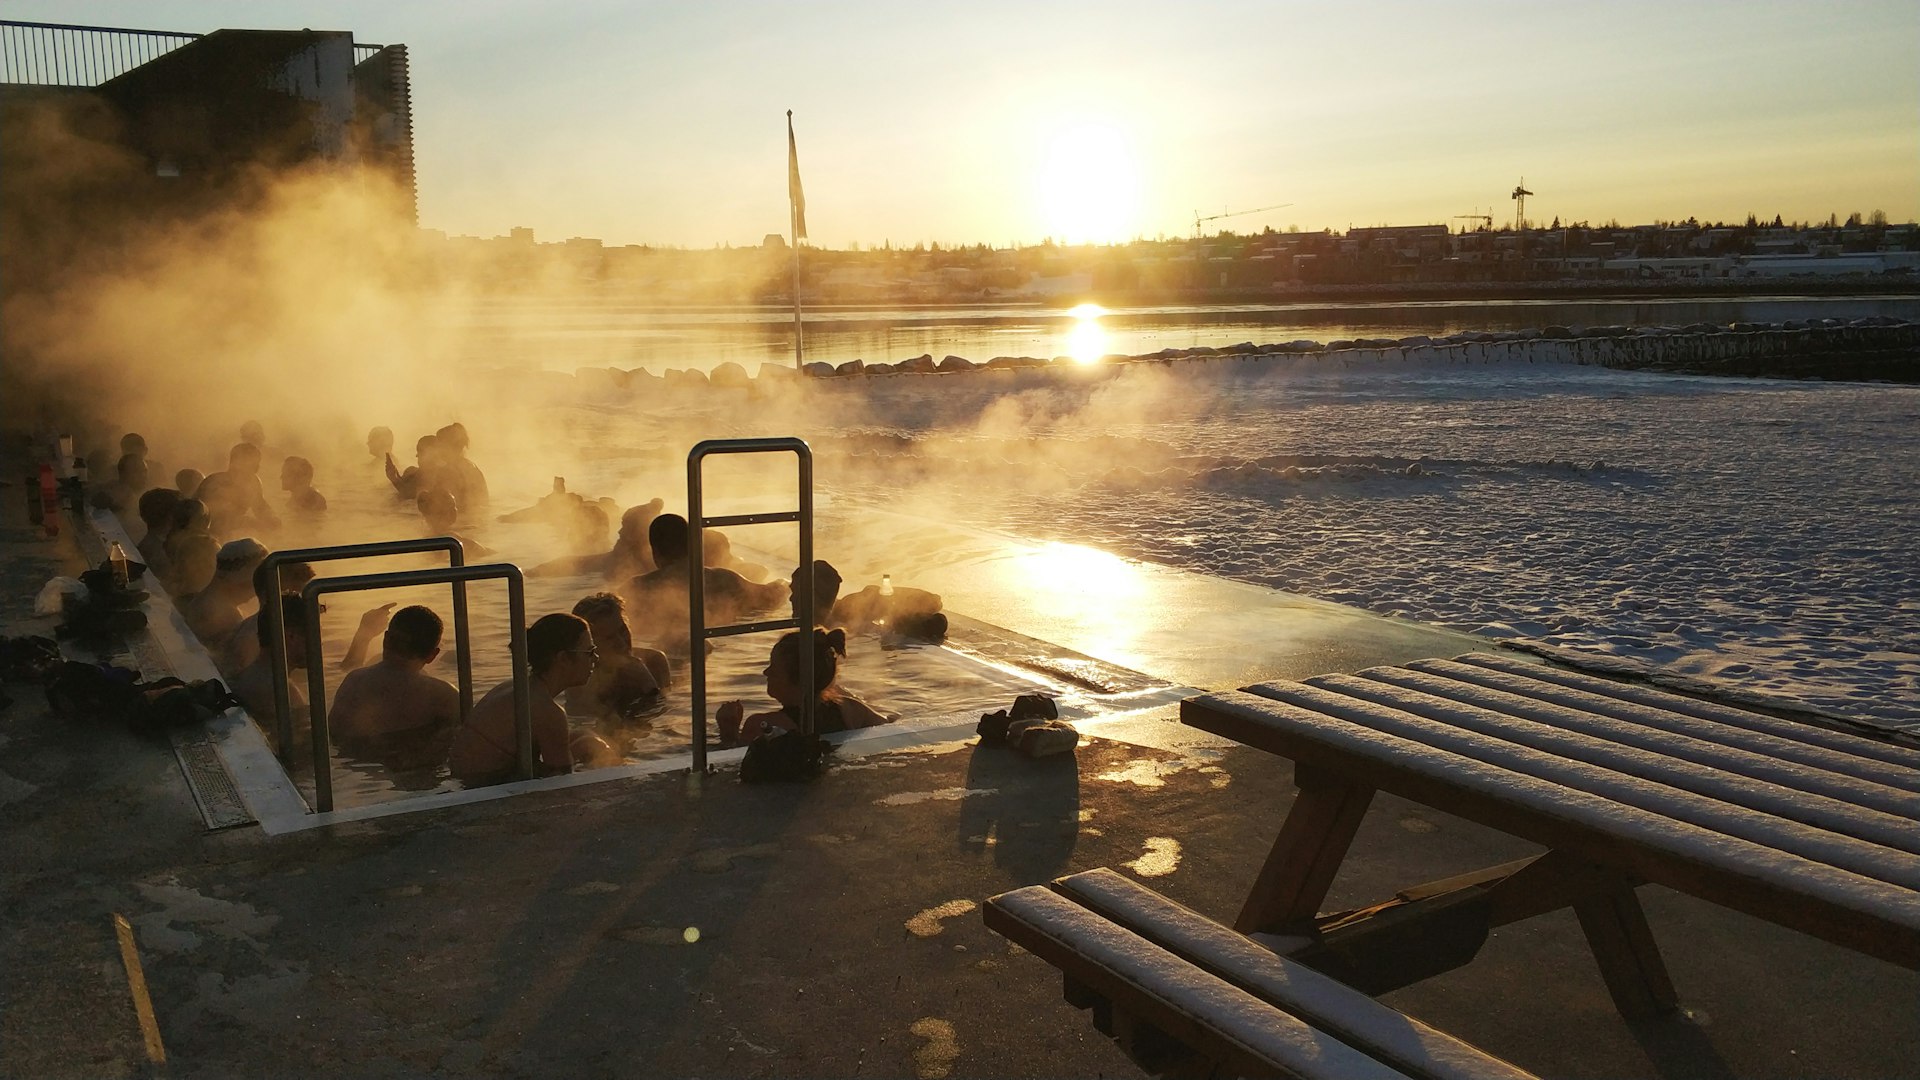 People crowded into a hot tub on a snowy day as the sun sets